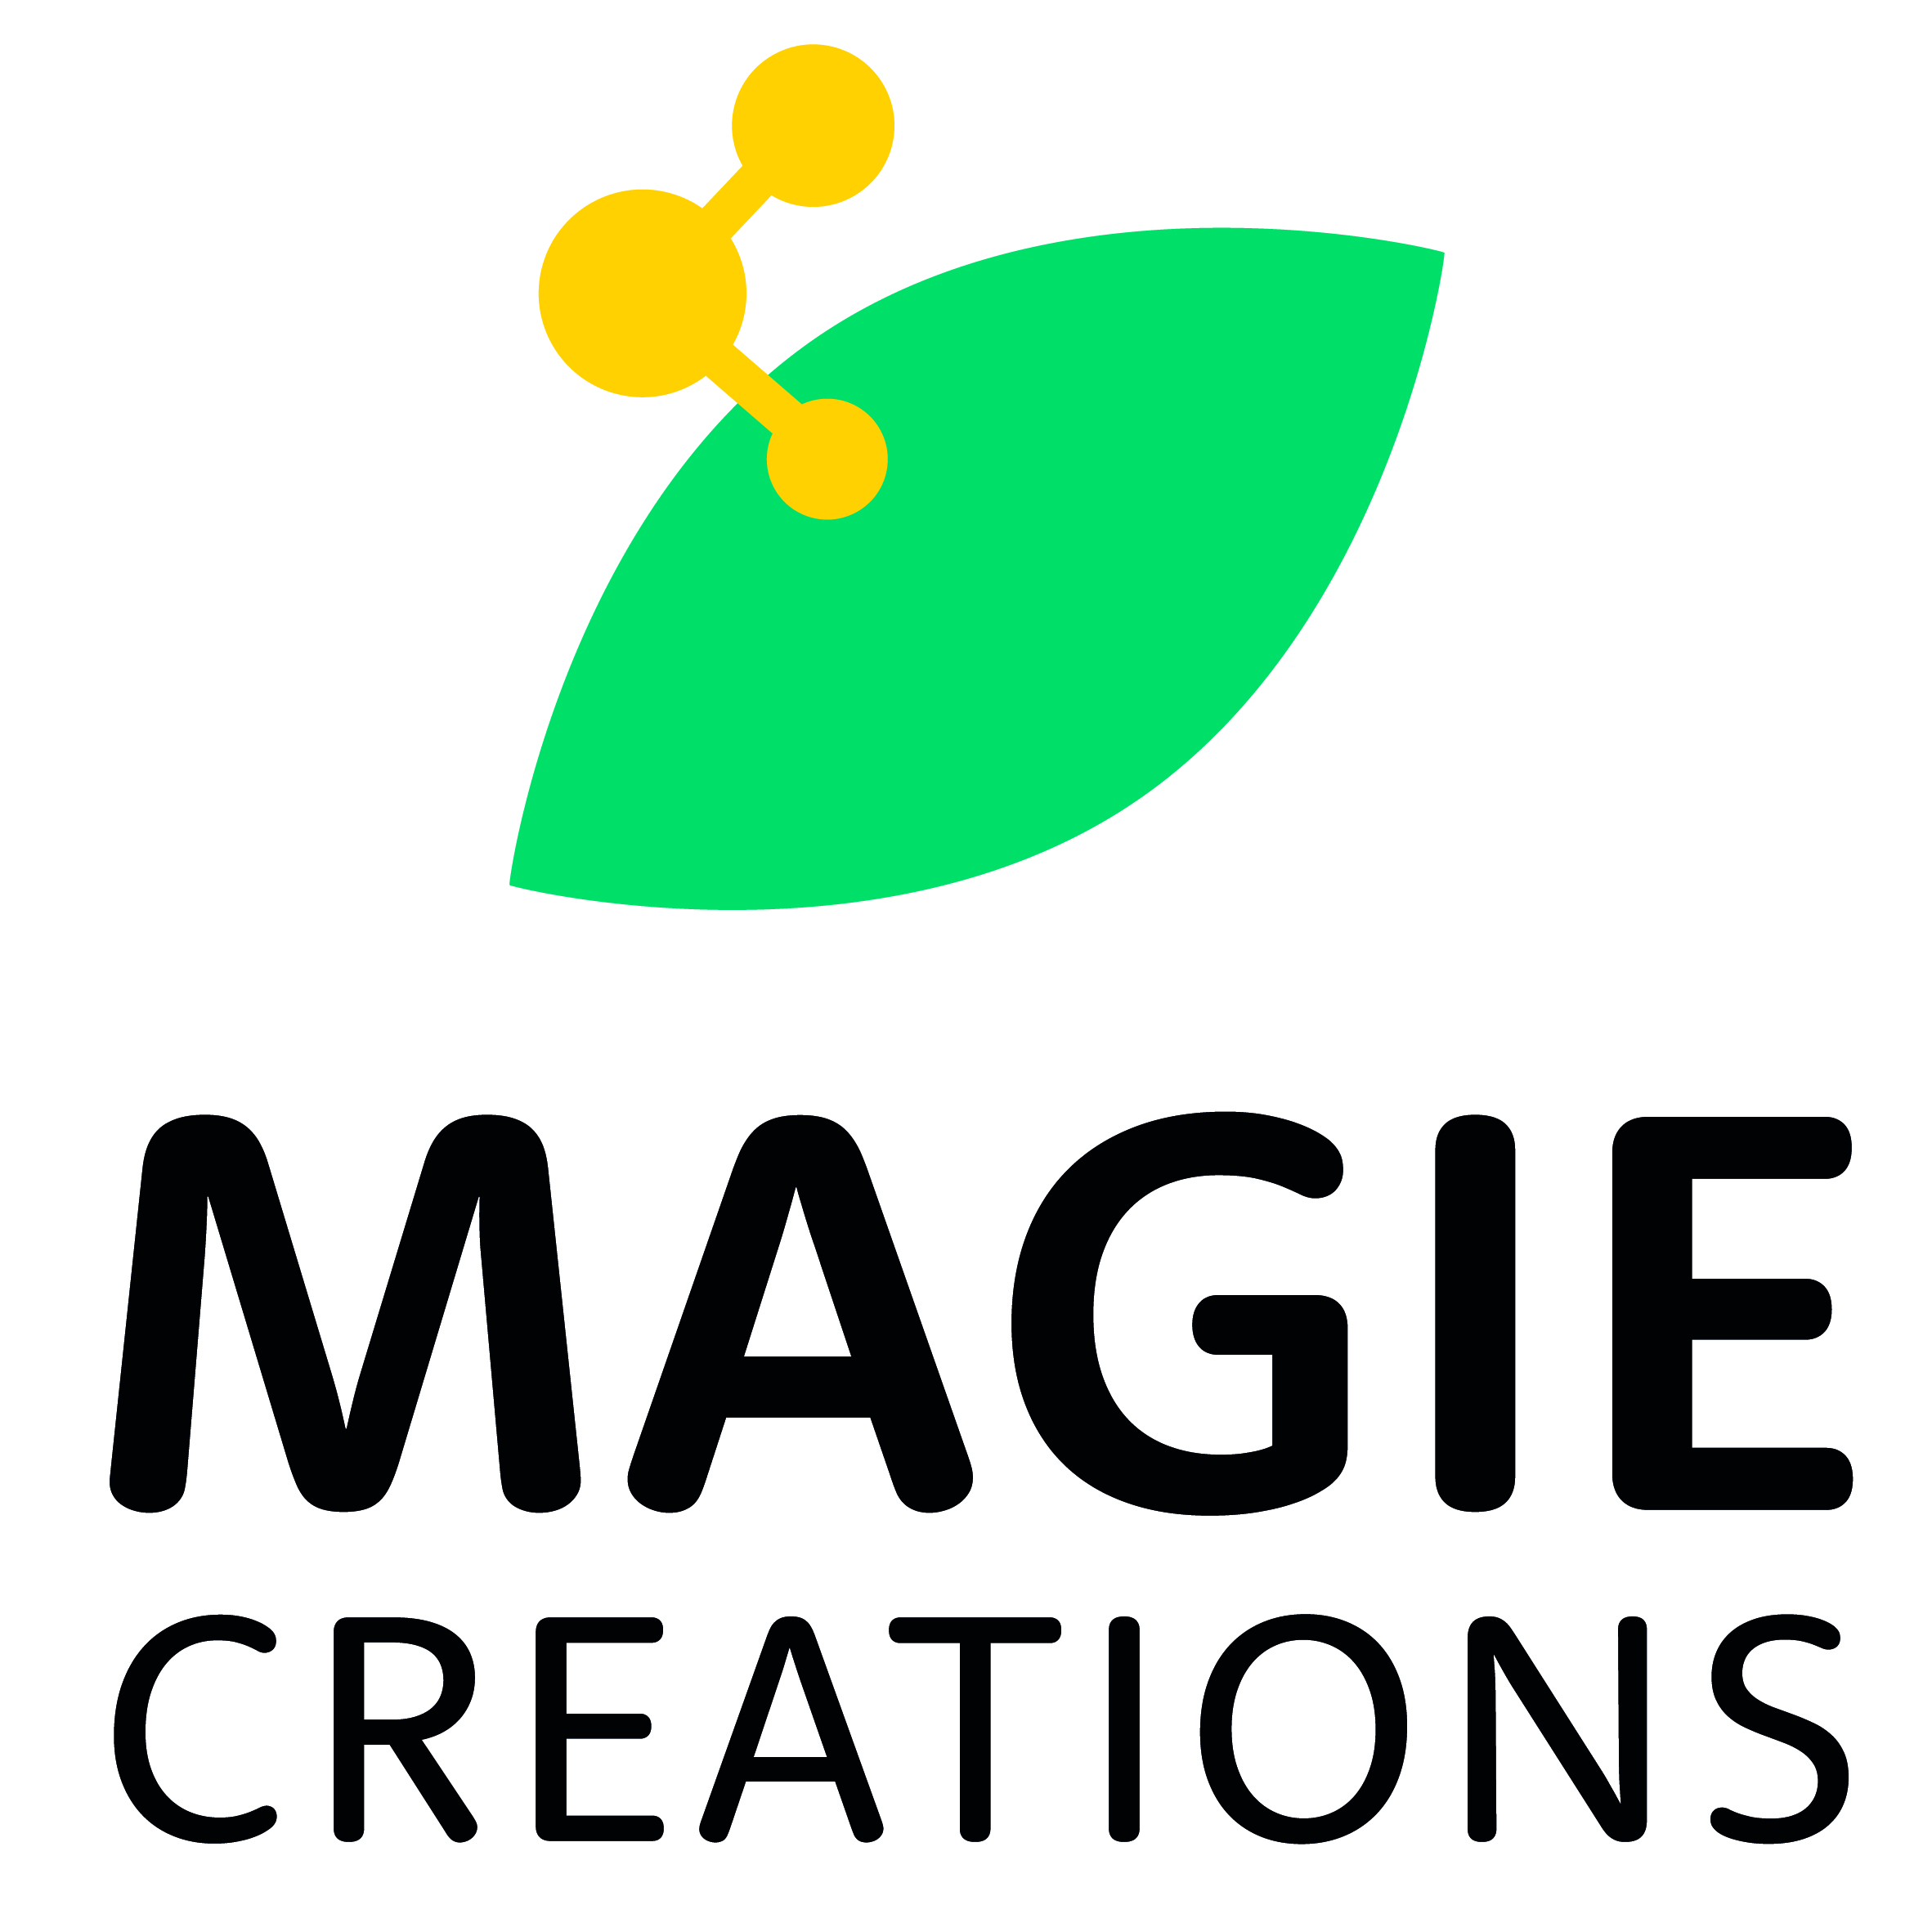 MaGie Creations